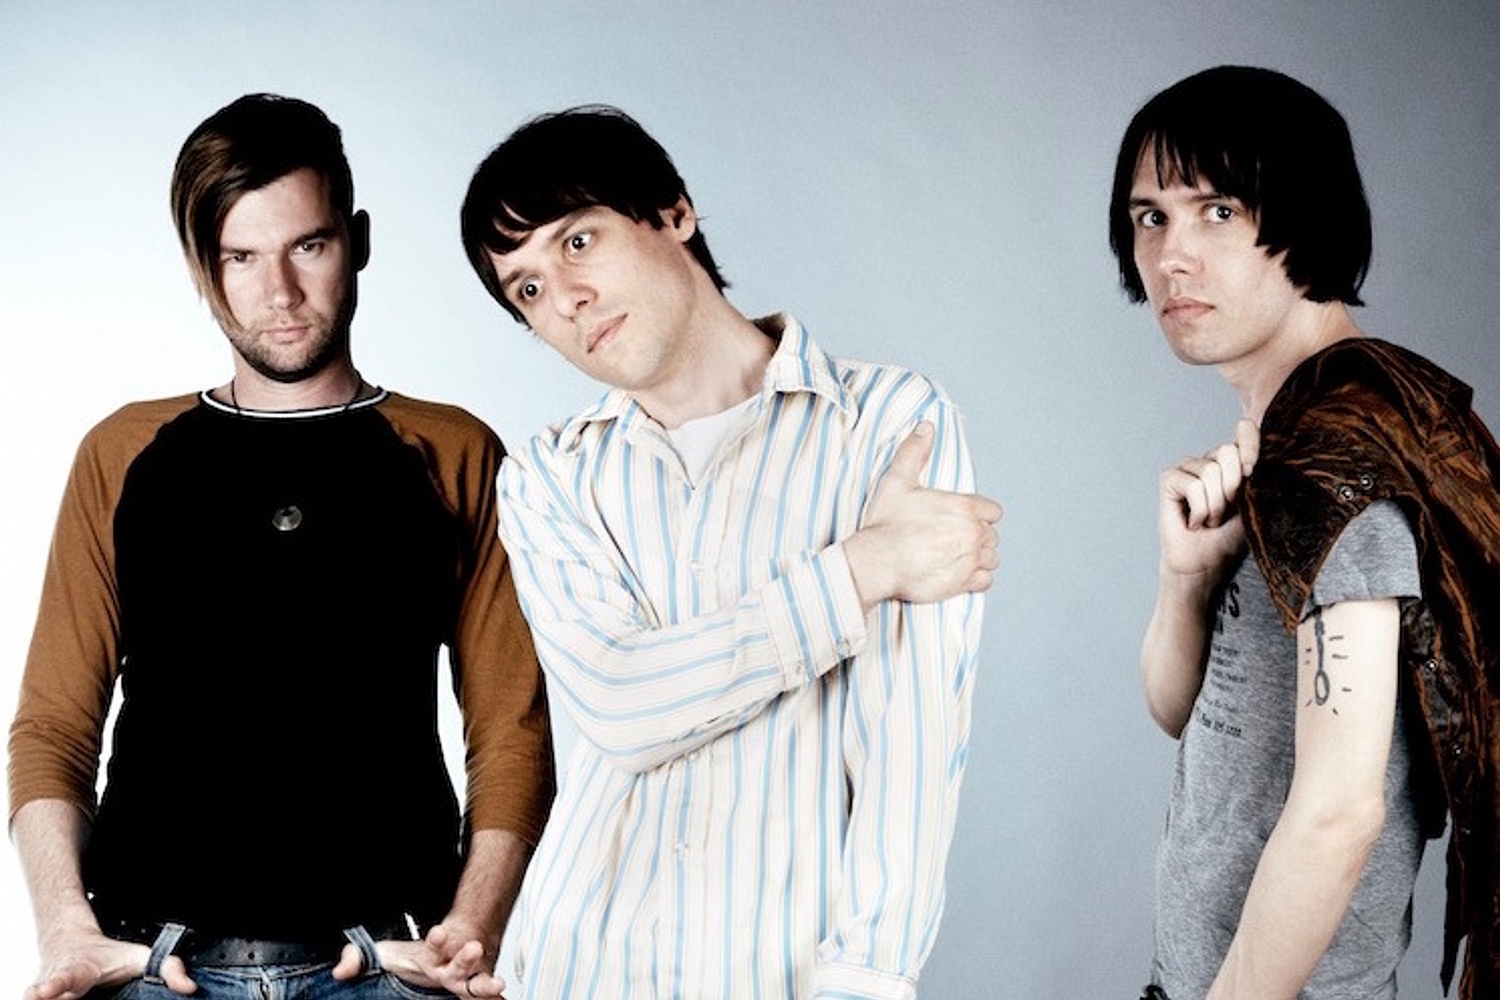 The Cribs have announced their new album ’24-7 Rock Star Shit’